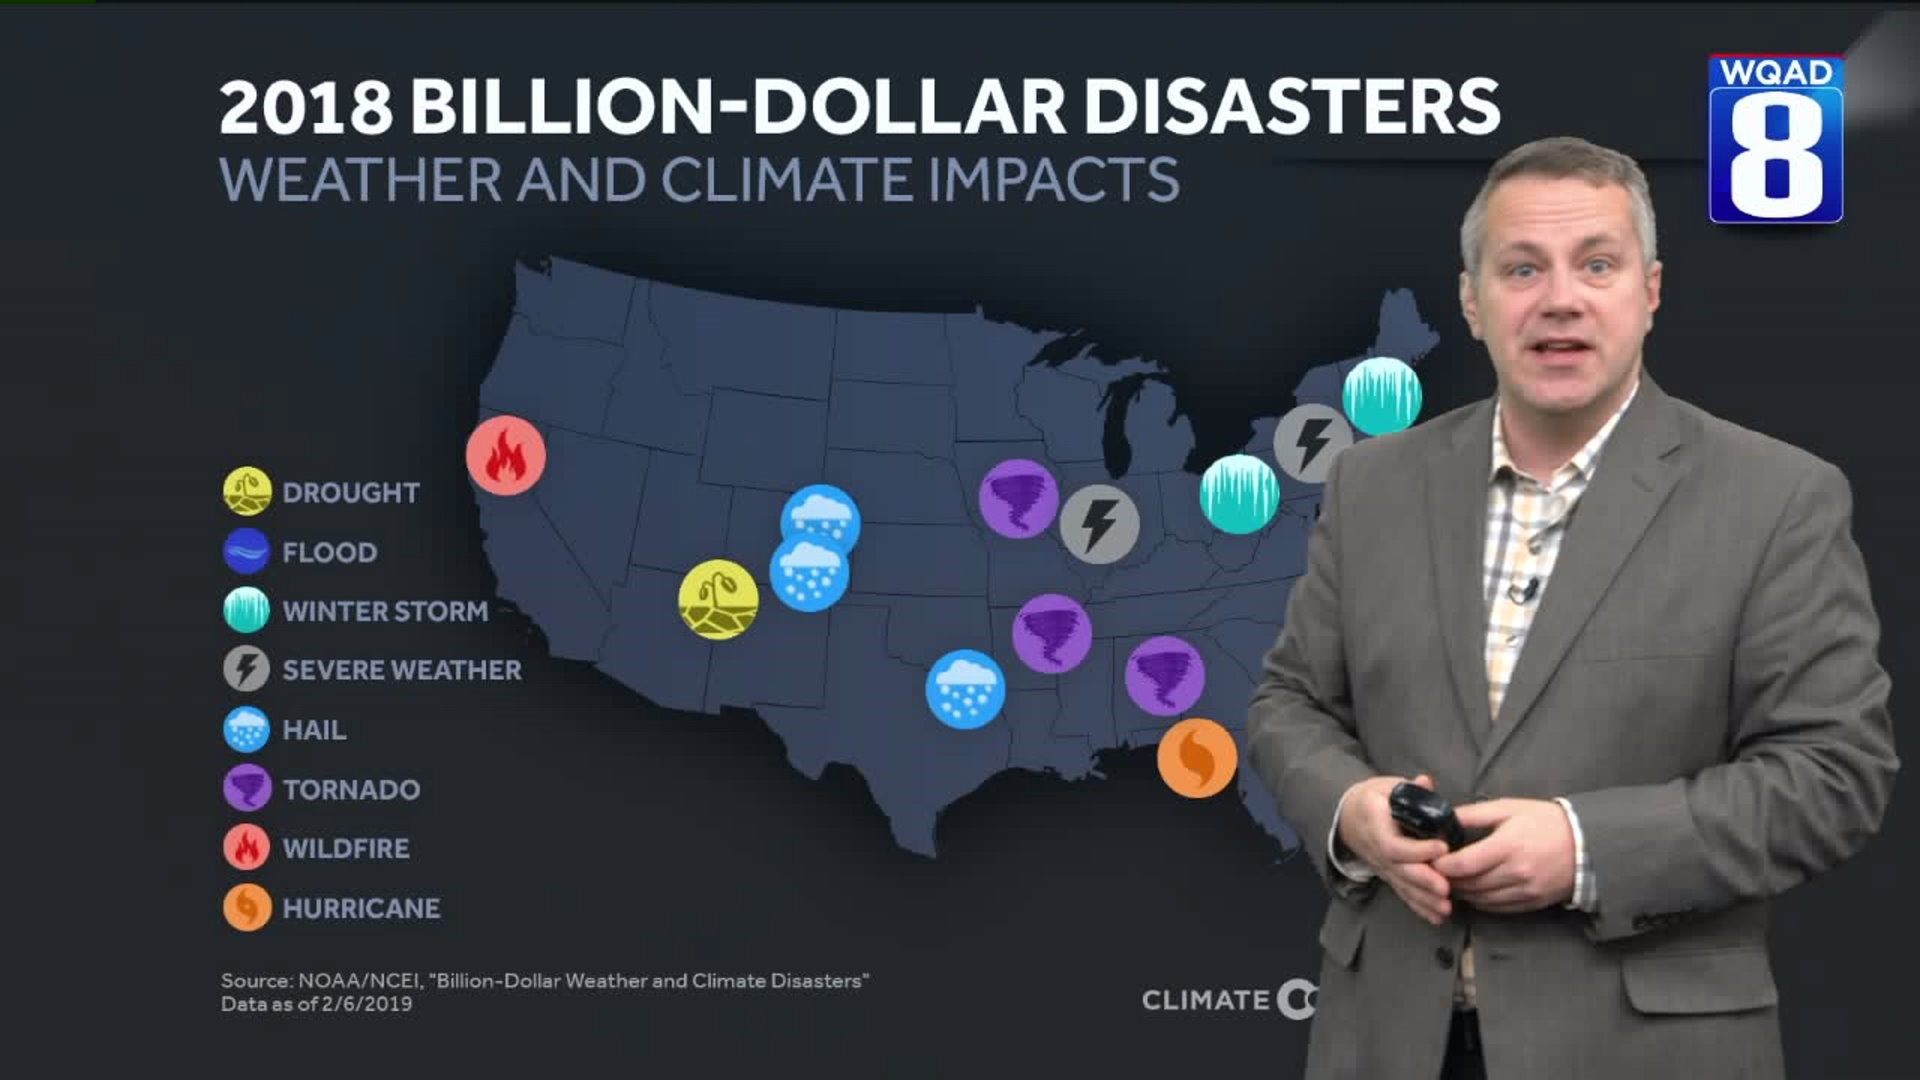 Eric explains why we are seeing more billion-dollar climate disasters